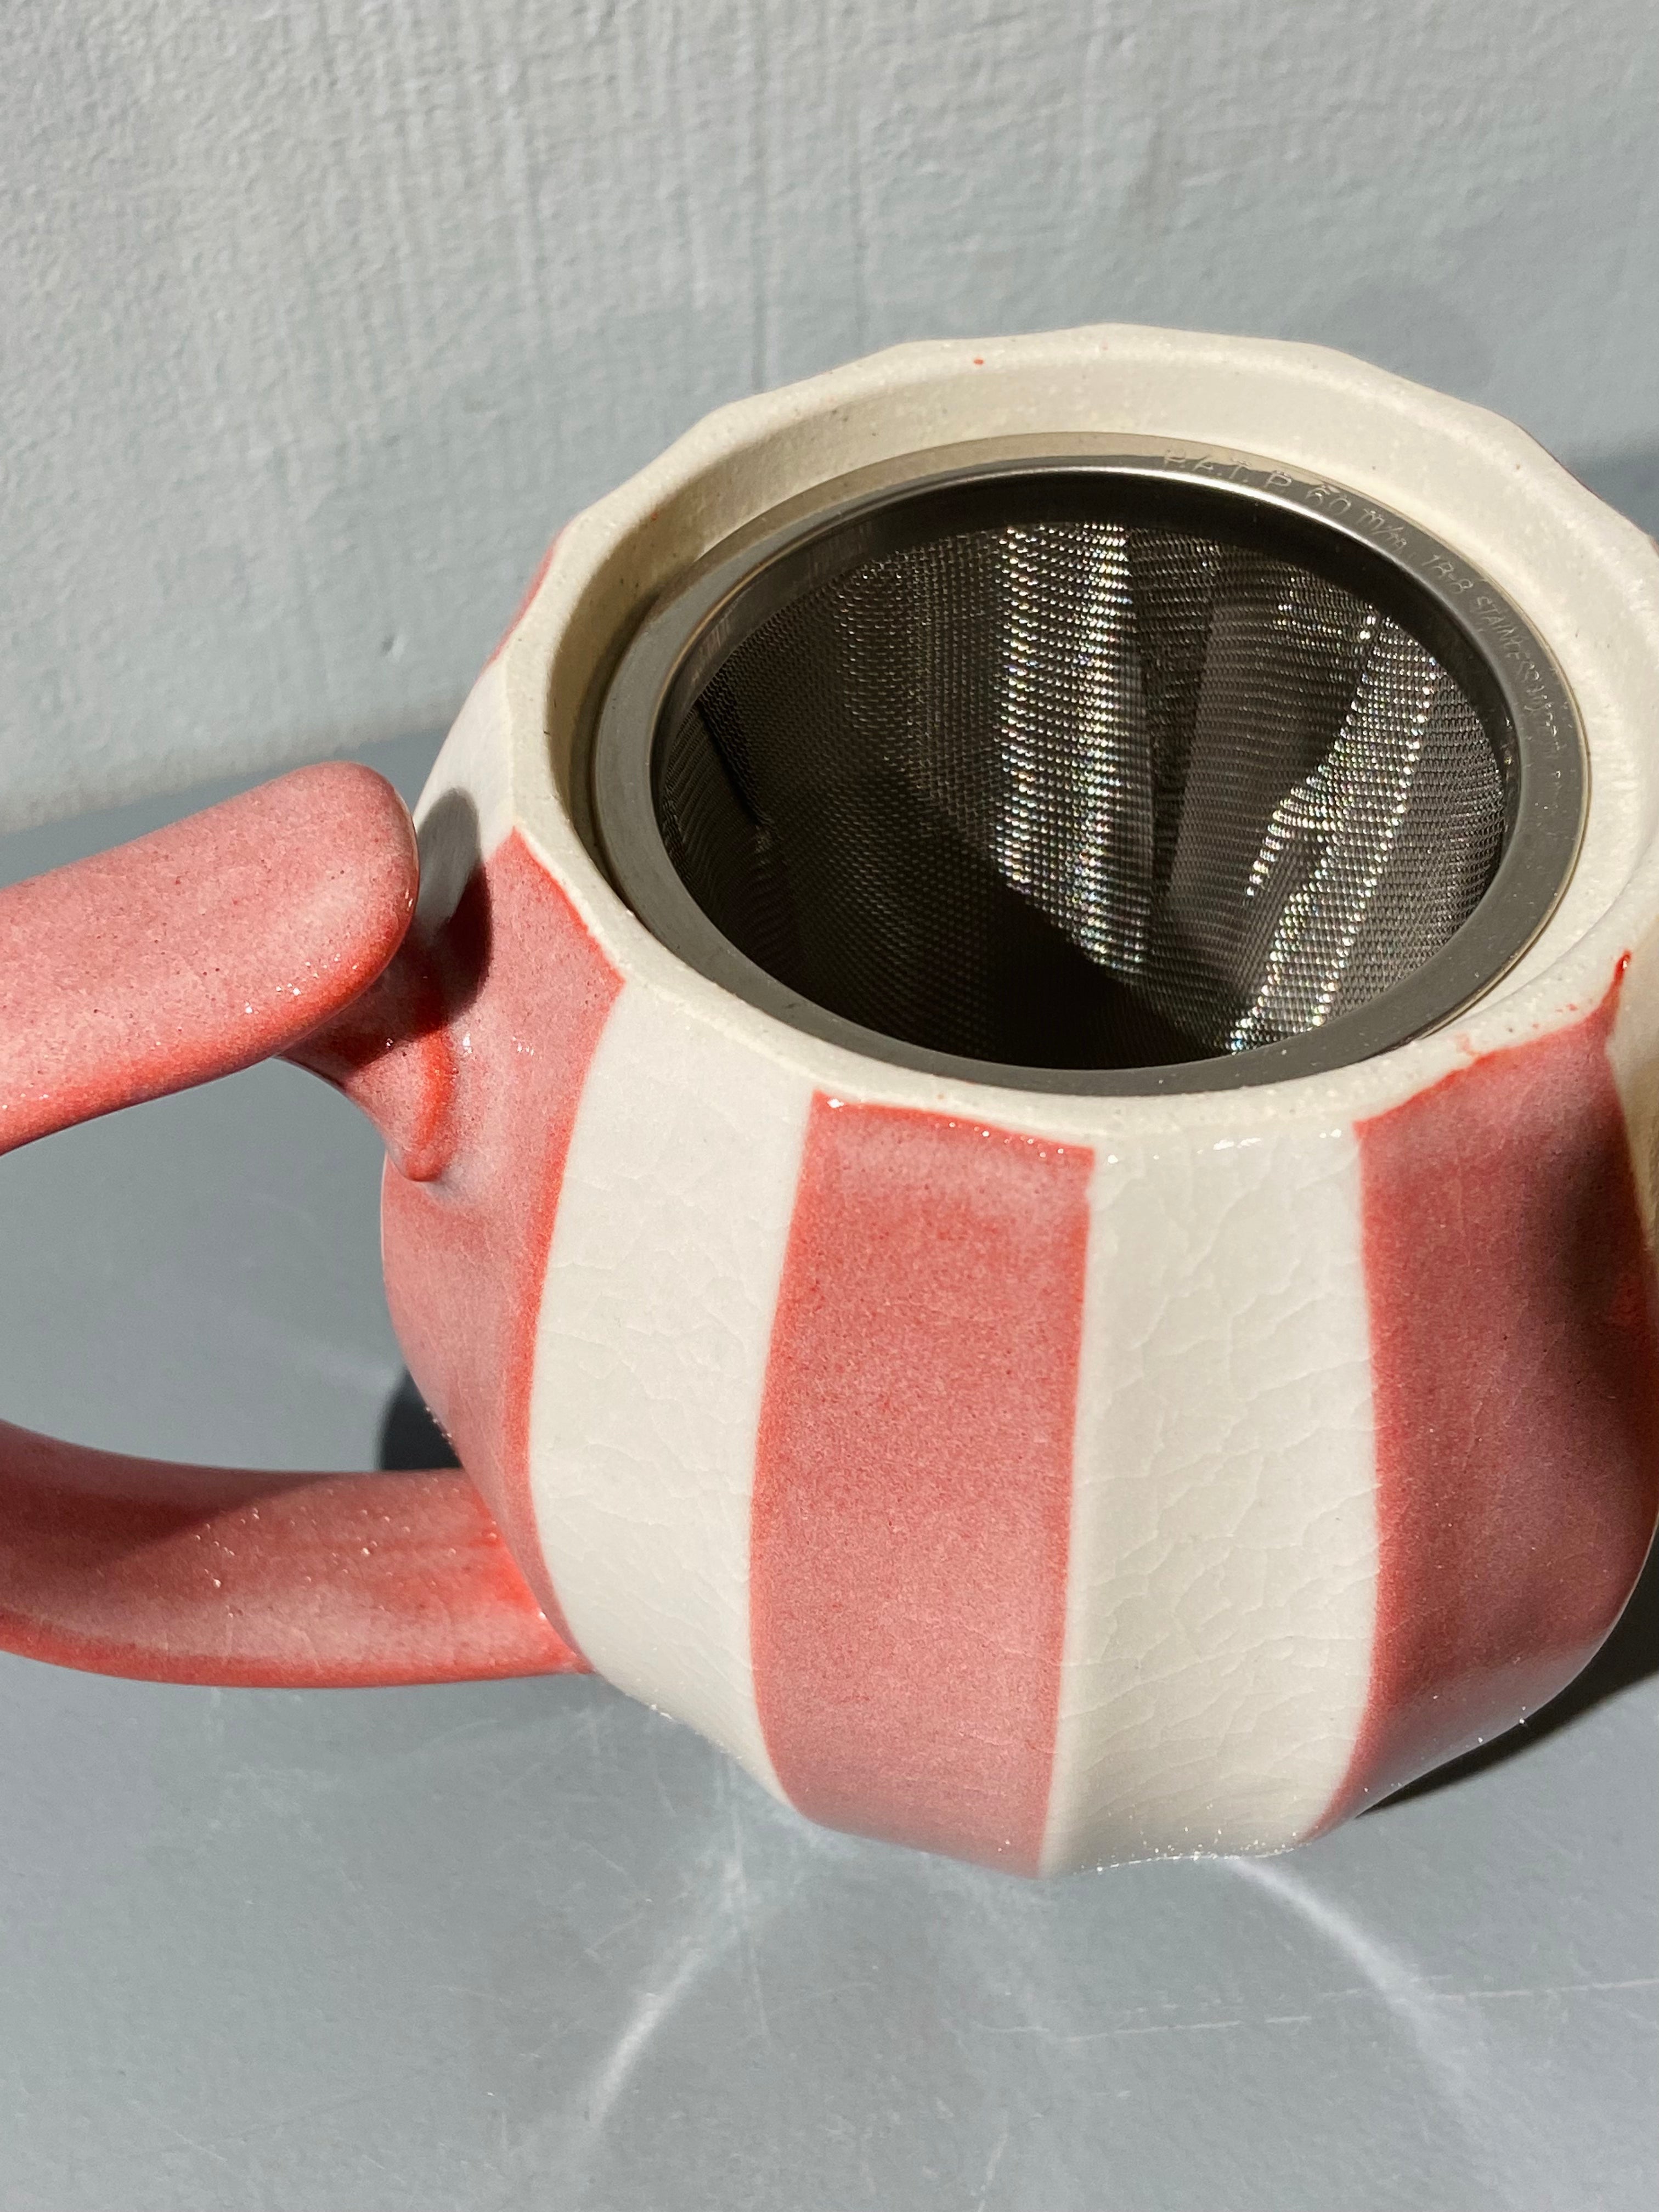 Japanese teapot with pink stripes